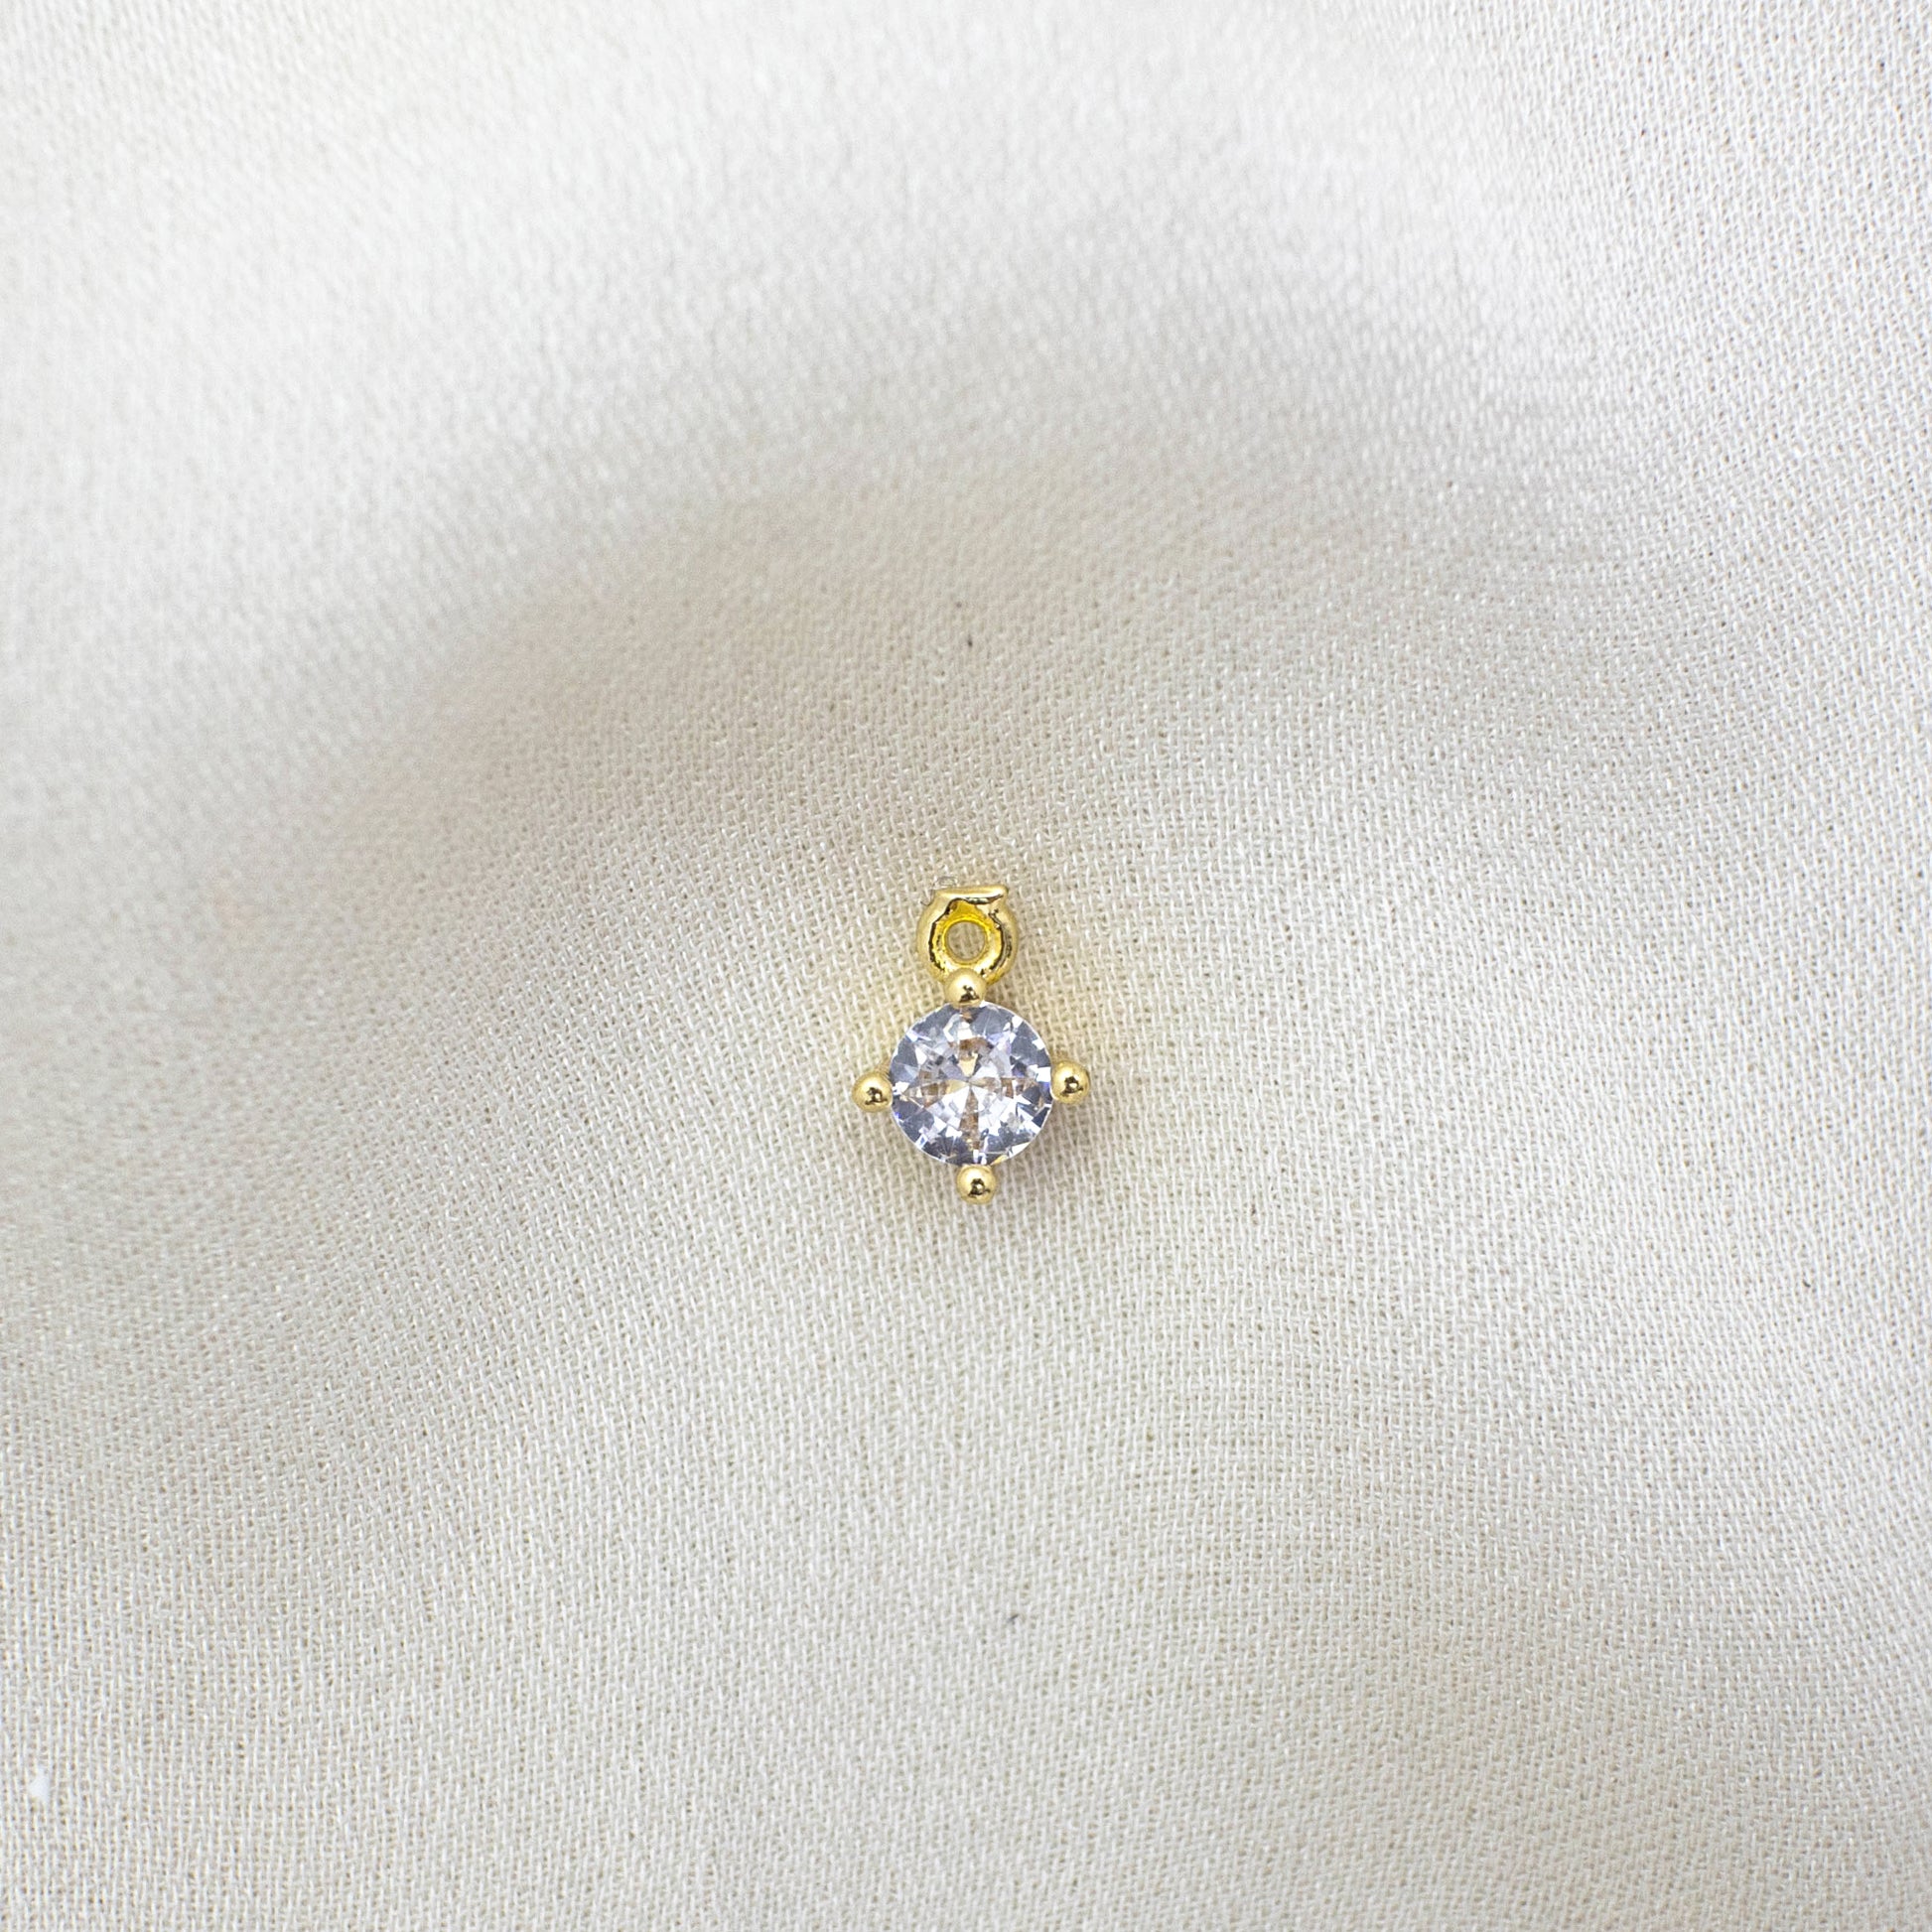 This photo features with a Round Zircon Charm